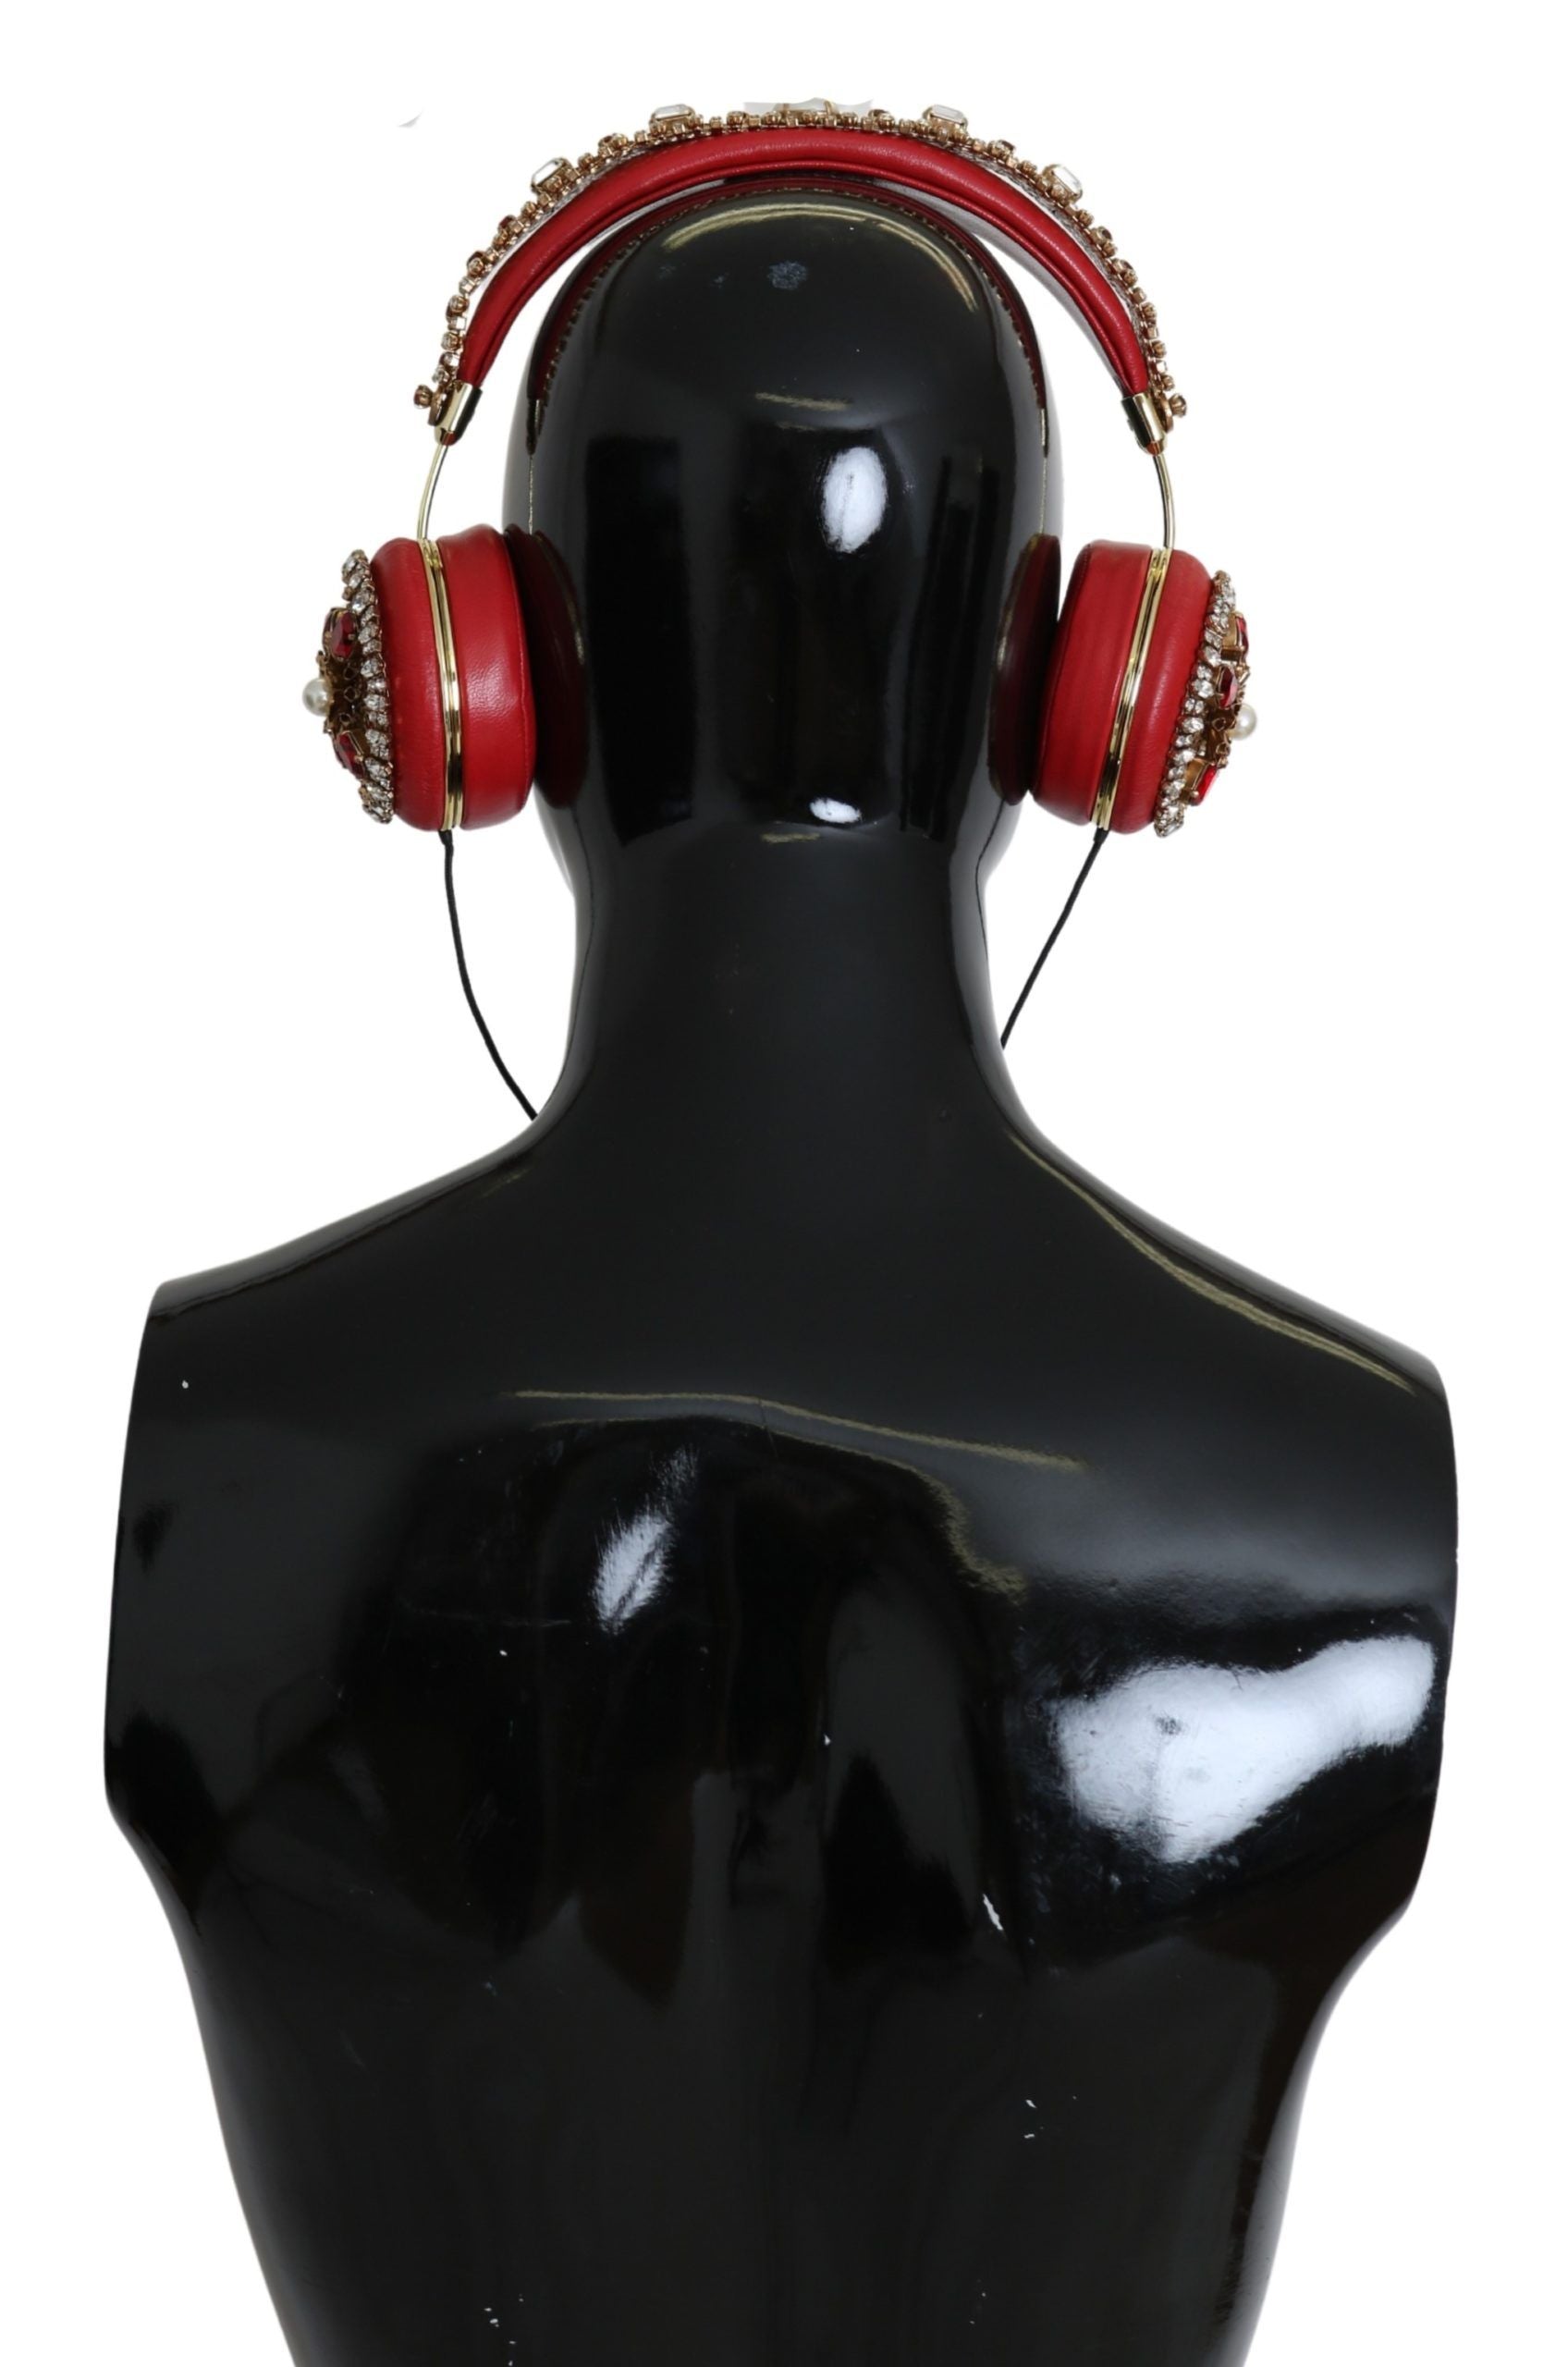 FRENDS Leather Red Floral Crystal Headset Headphones - Designed by Dolce & Gabbana Available to Buy at a Discounted Price on Moon Behind The Hill Online Designer Discount Store